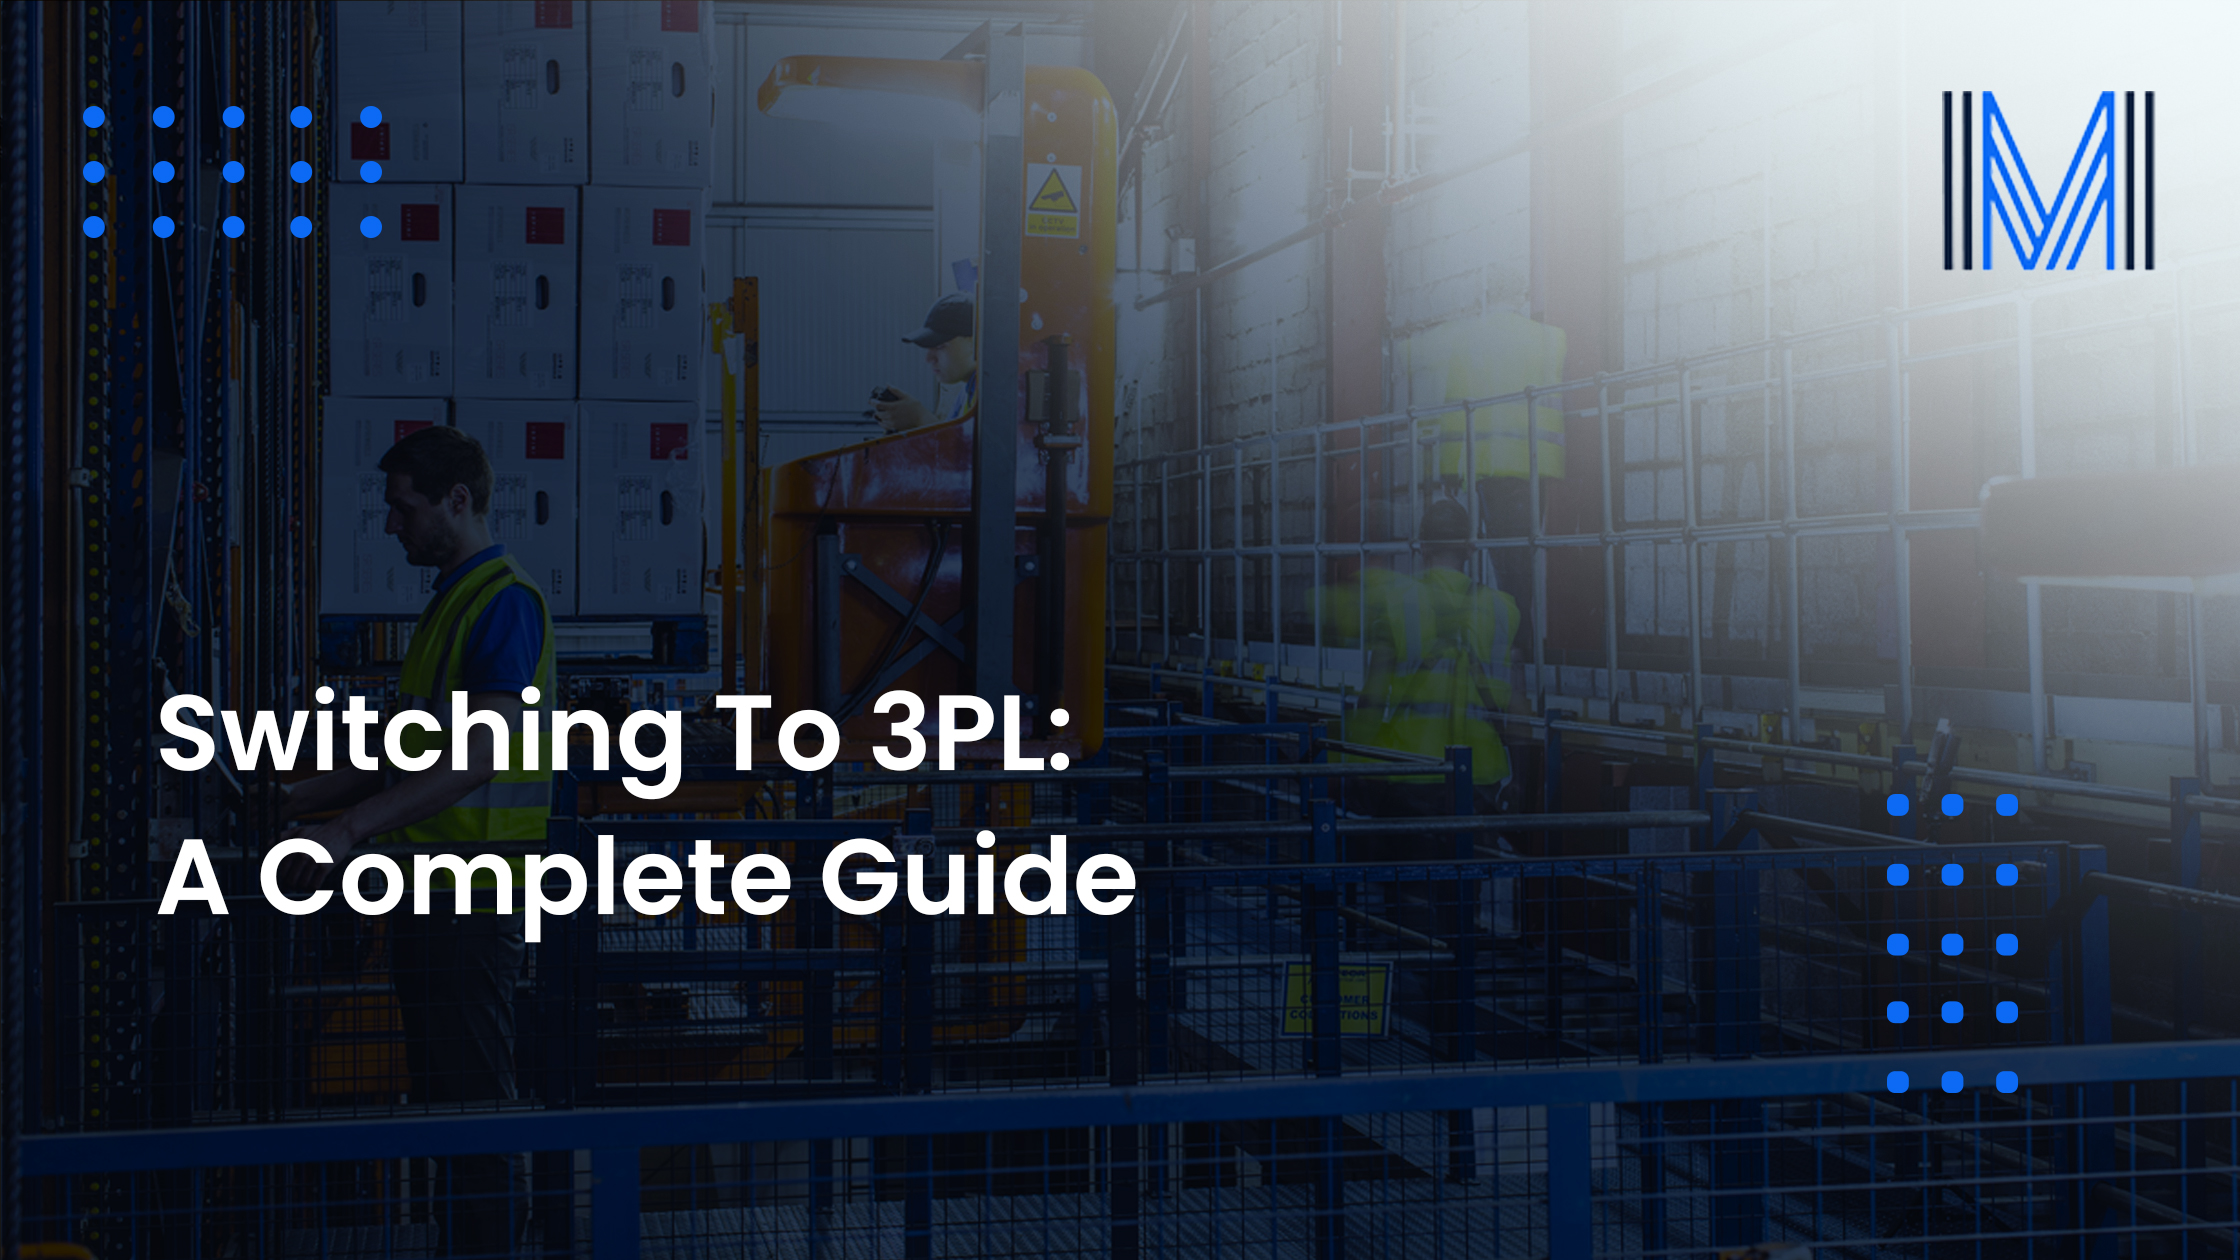 Switching To 3PL: A Complete Guide